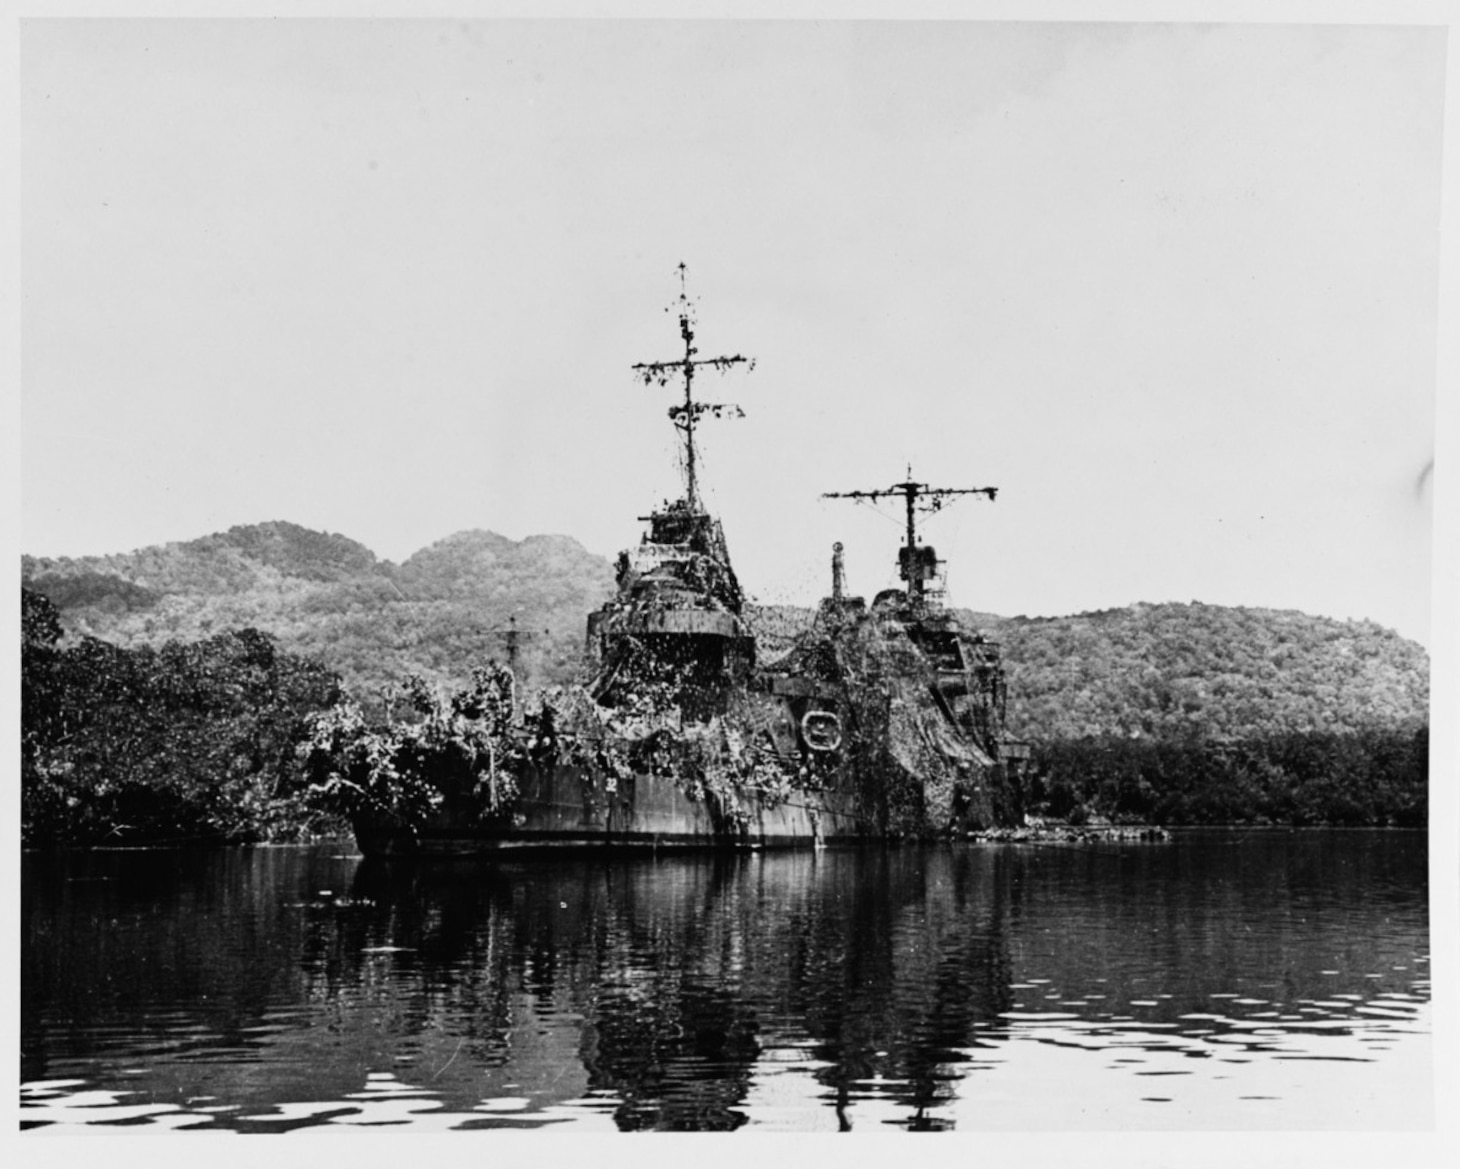 USS New Orleans (CA-32), ca. 1942. Camouflaged at Tulagi, Solomon Islands, some days after she was torpedoed during the Battle of Tassafaronga on 30 November 1942. Note that her stern is riding high and that her forward end is low in the water. The torpedo and subsequent explosion had severed her bow between #1 and #2 eight-inch gun turrets. Official Navy Photograph, now in the collections of the U.S. National Archives. (80-G-216014)